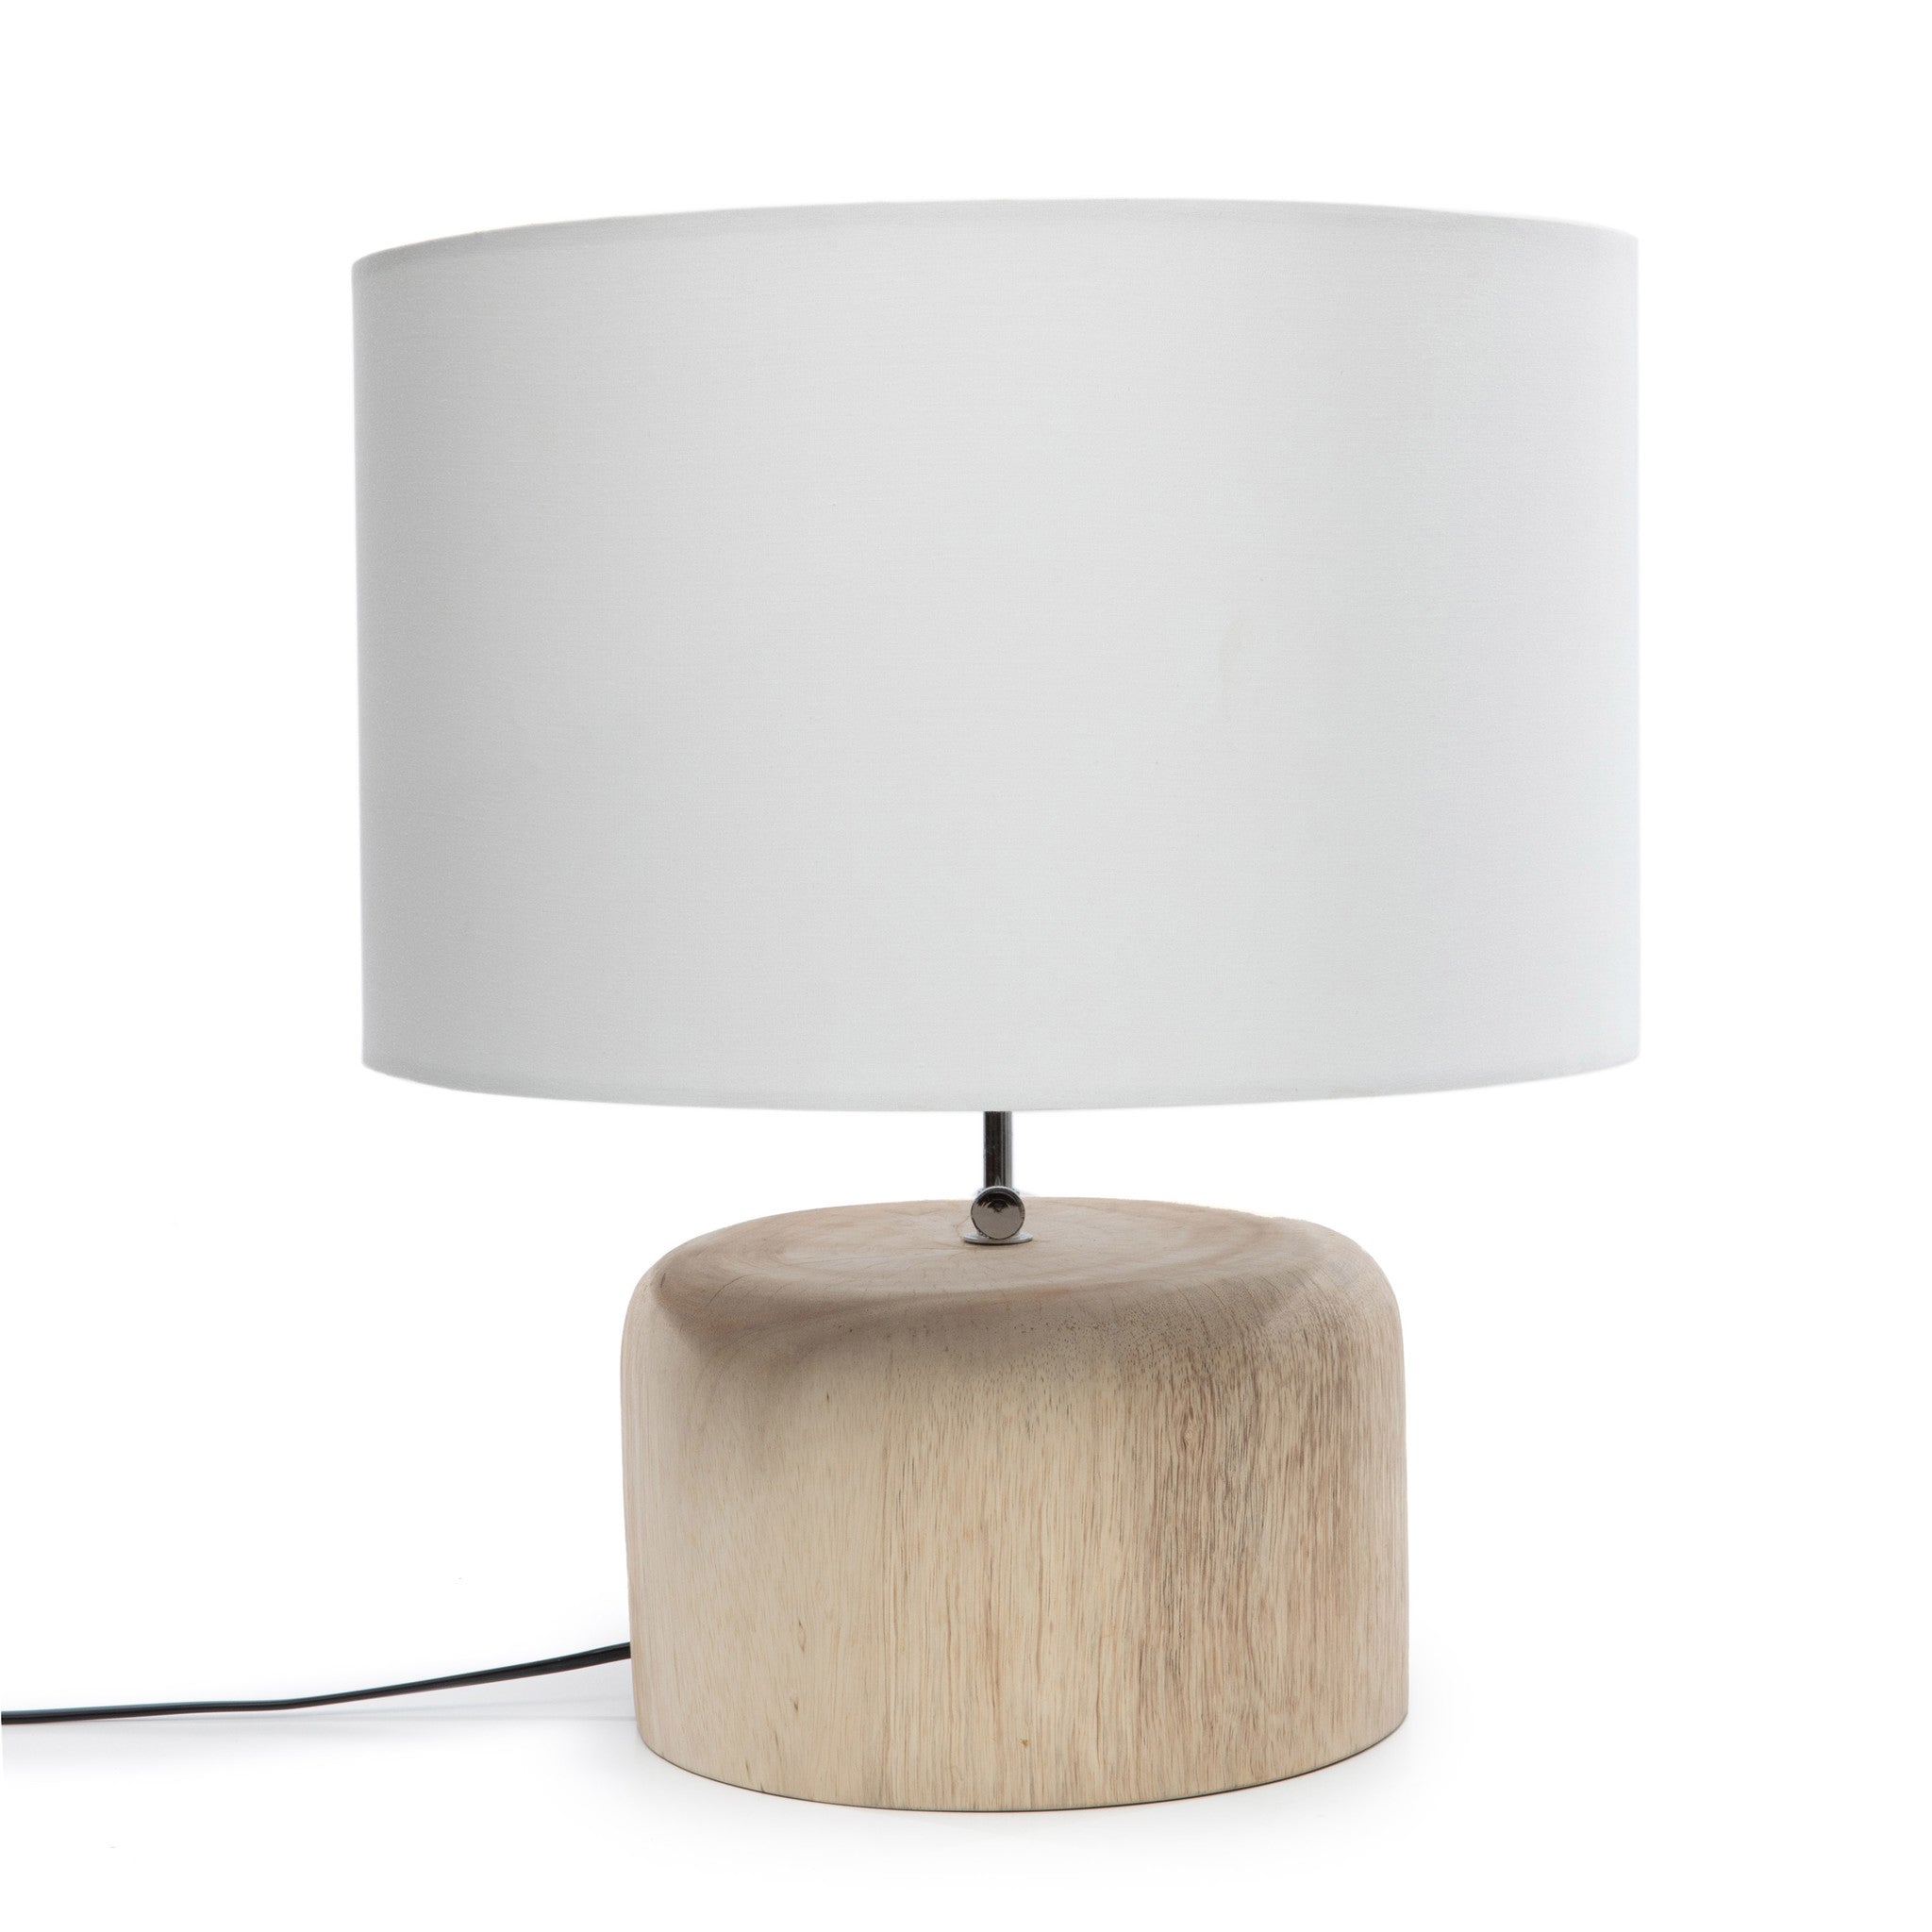 The table lamp in teak wood - Natural white